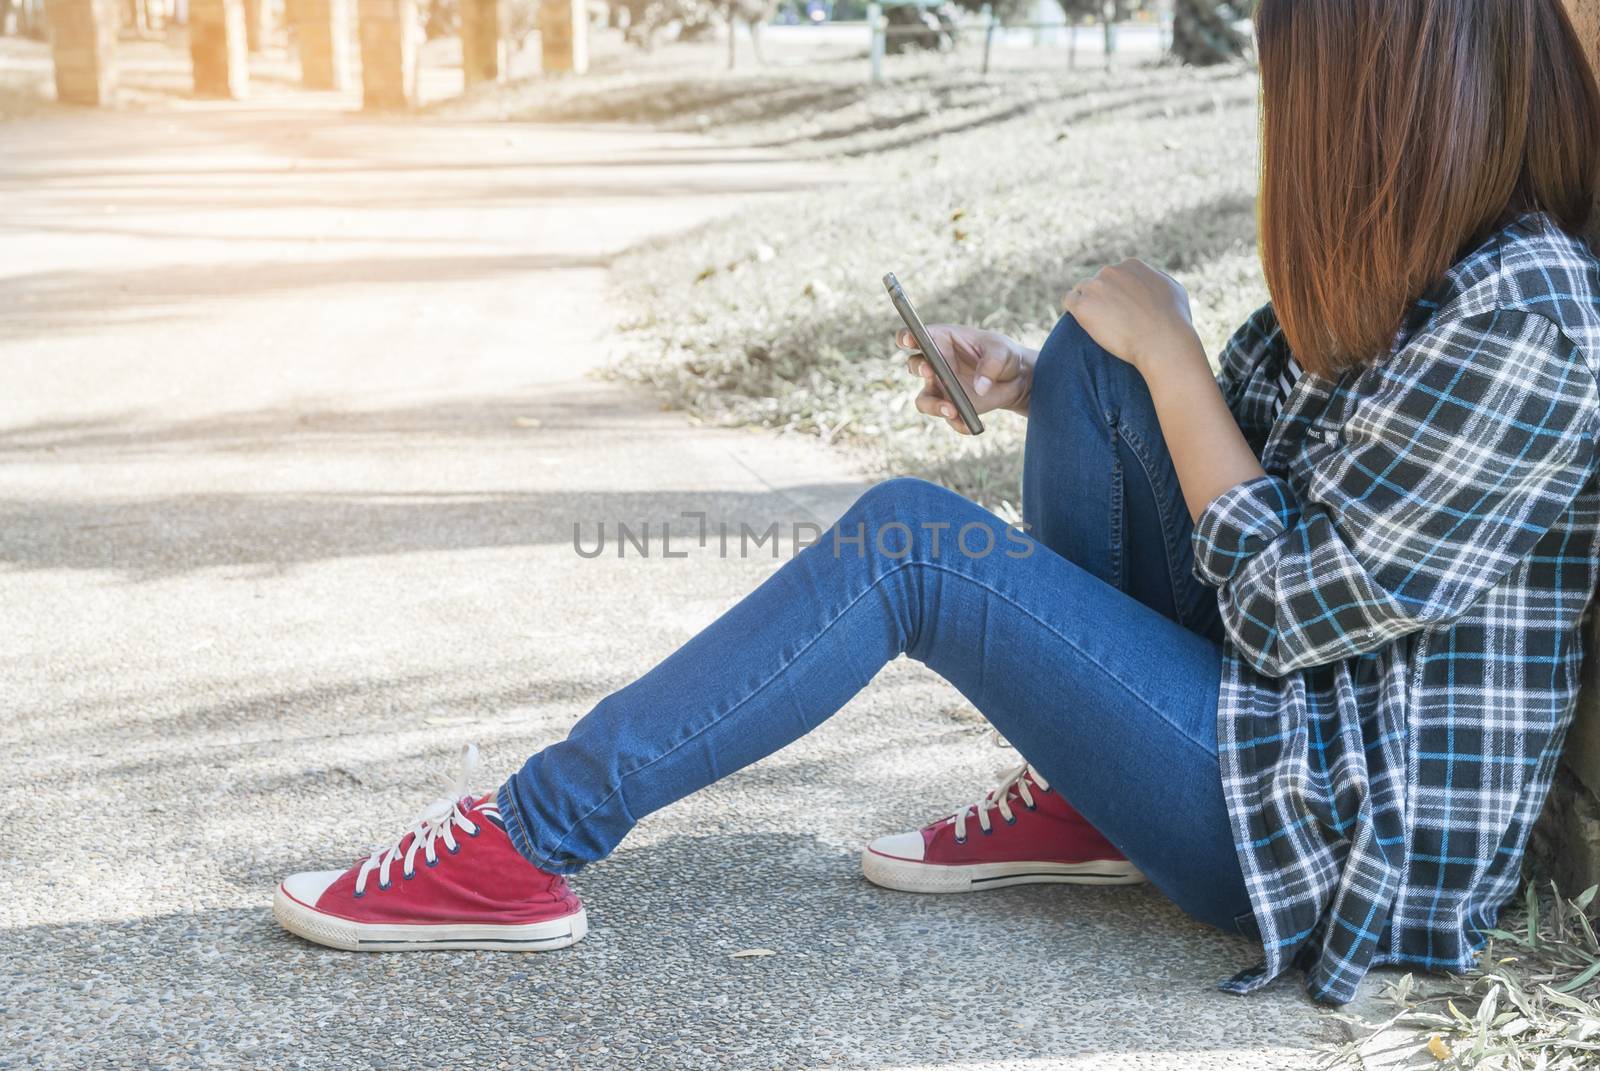 lonely girl sitting in park using her phone